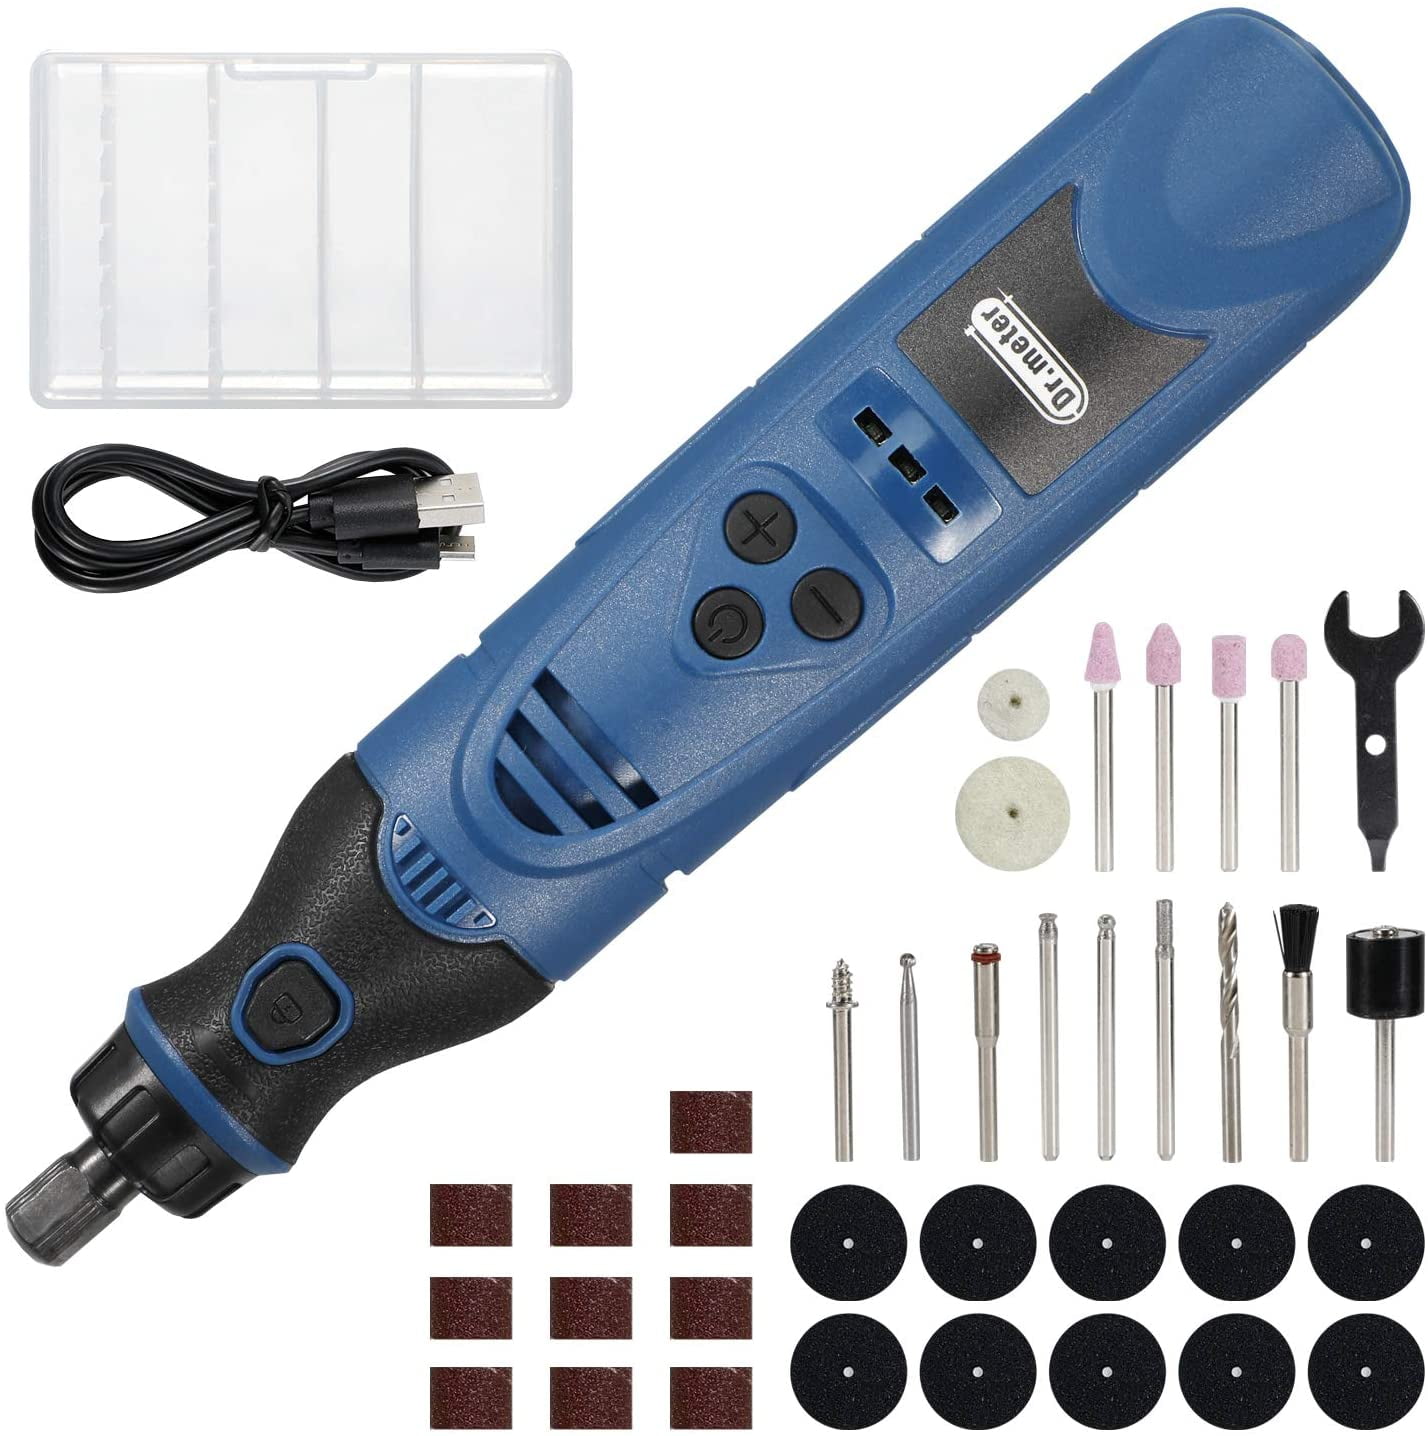 Trimming Polishing and More! Sanding 3.6V Cordless Rotary 60 Piece Tool Set Grinding 